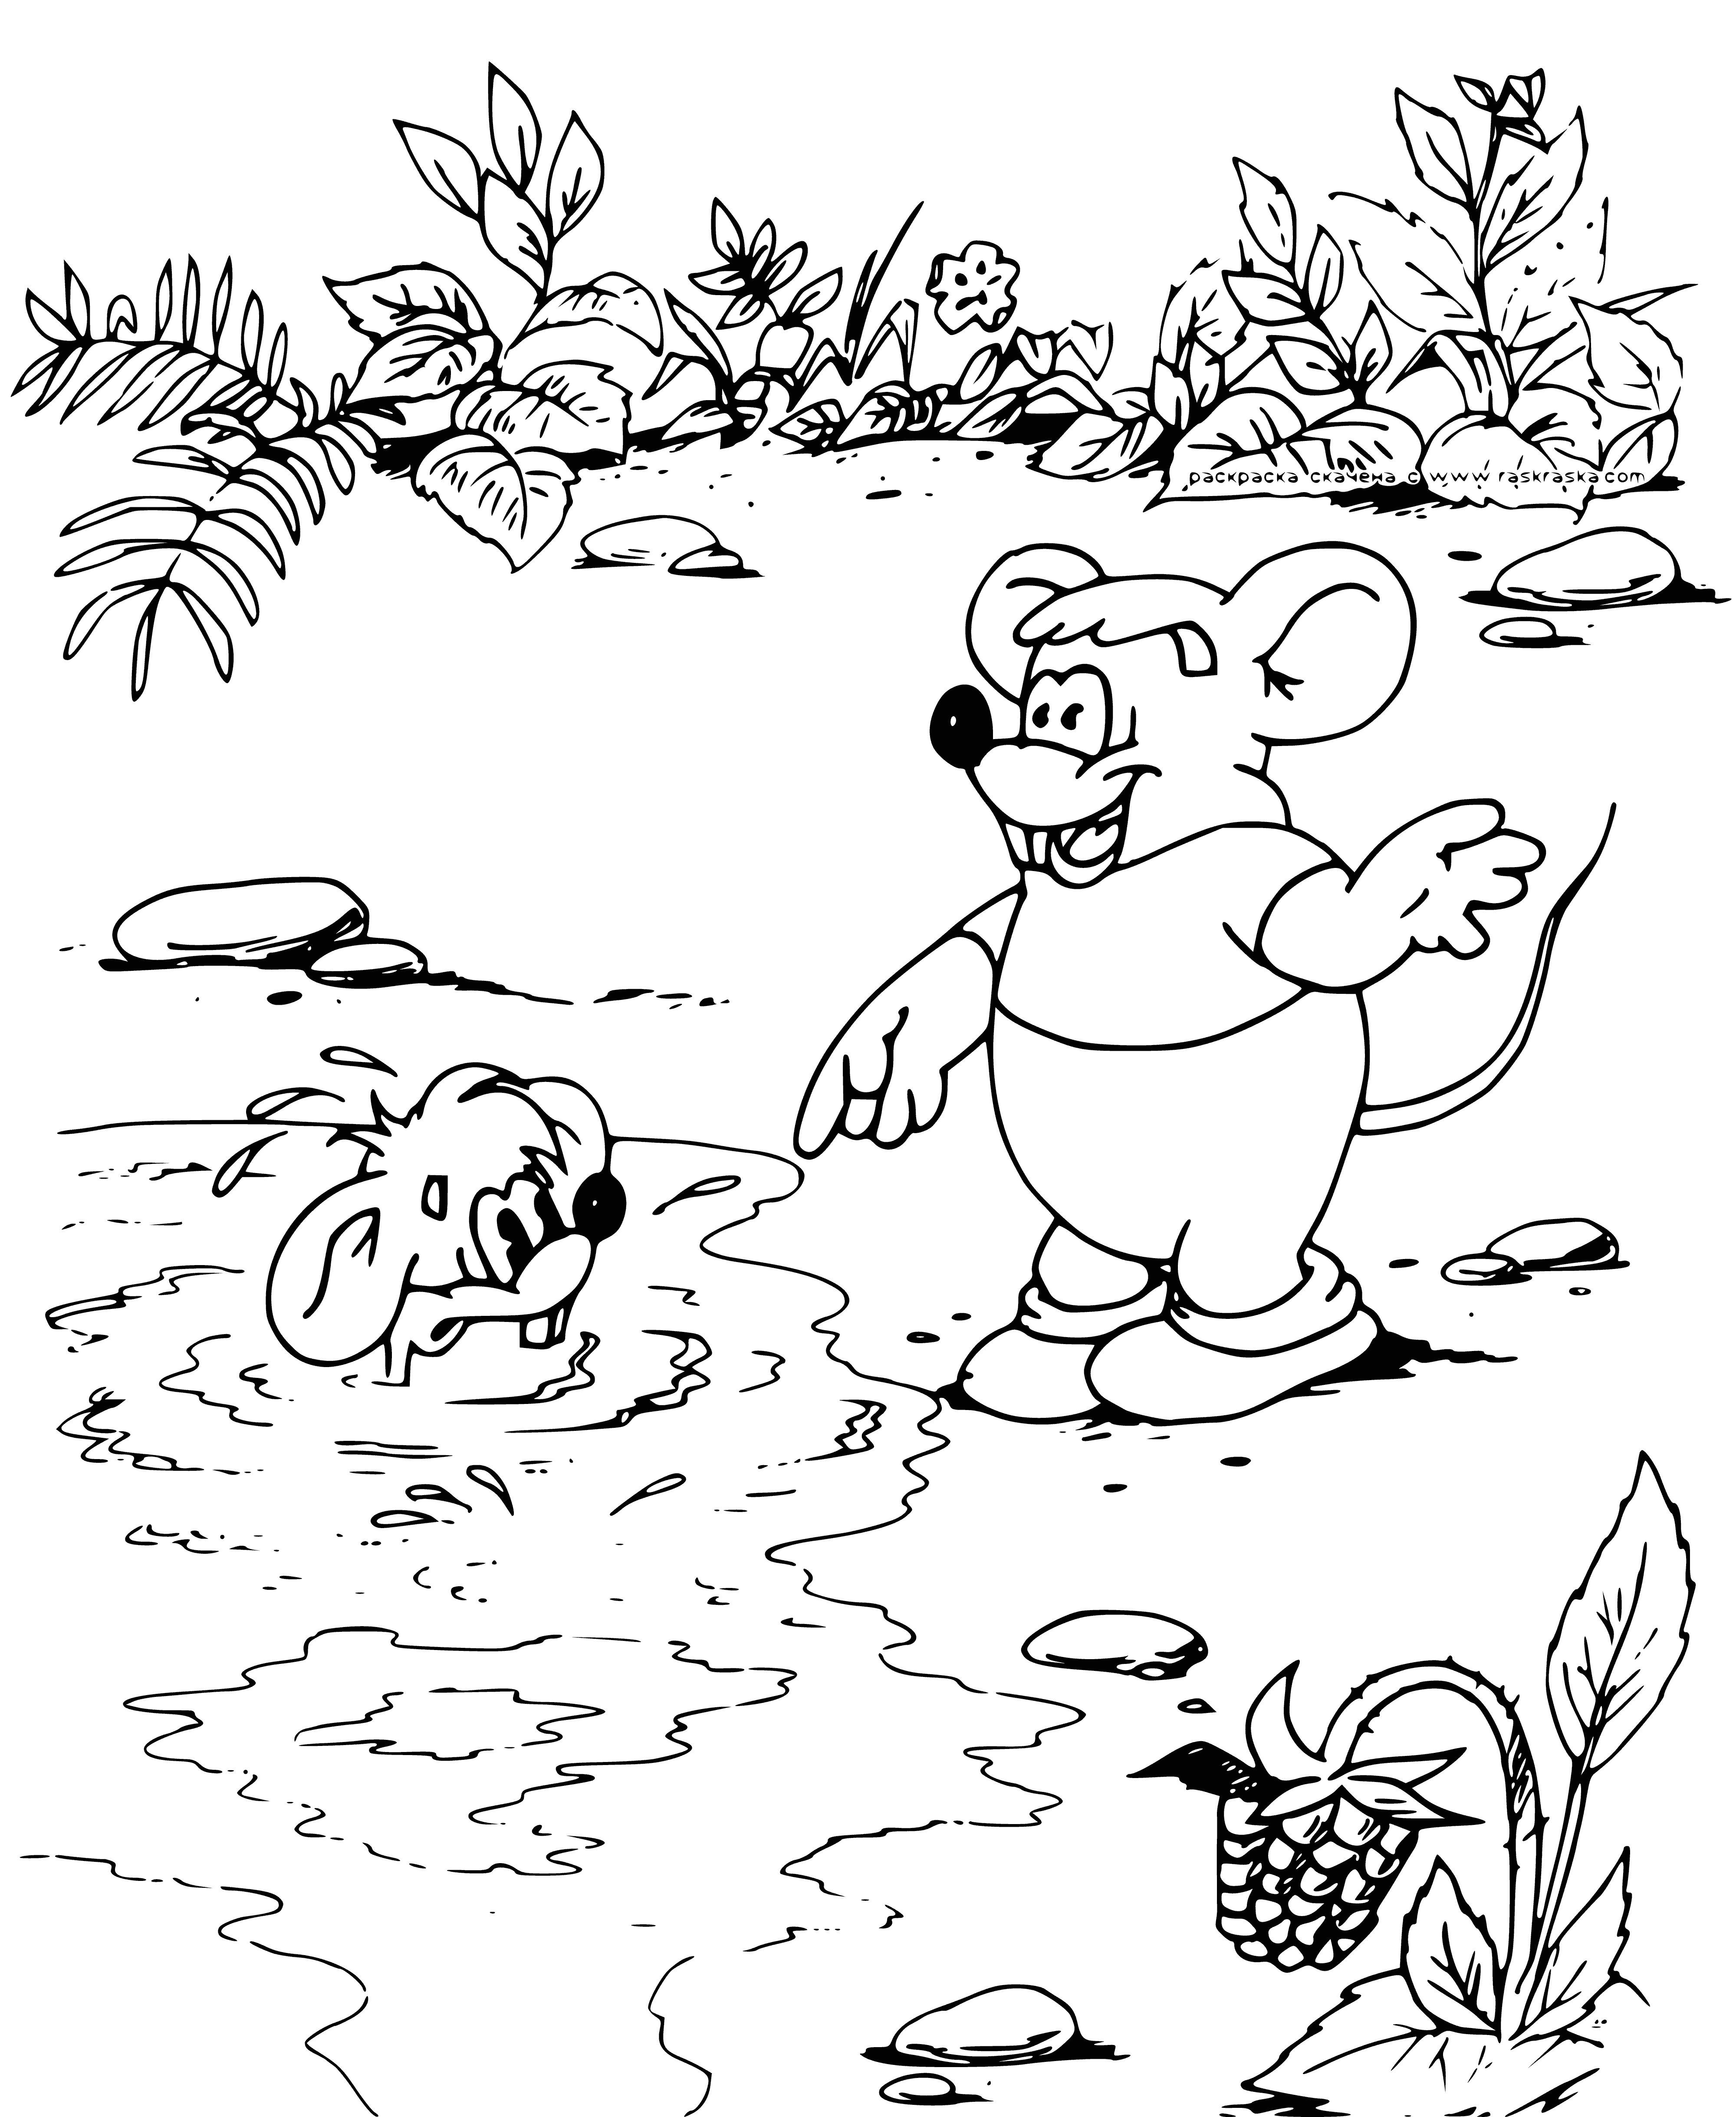 coloring page: Leopold the Cat falls into a puddle when trying to step around it.